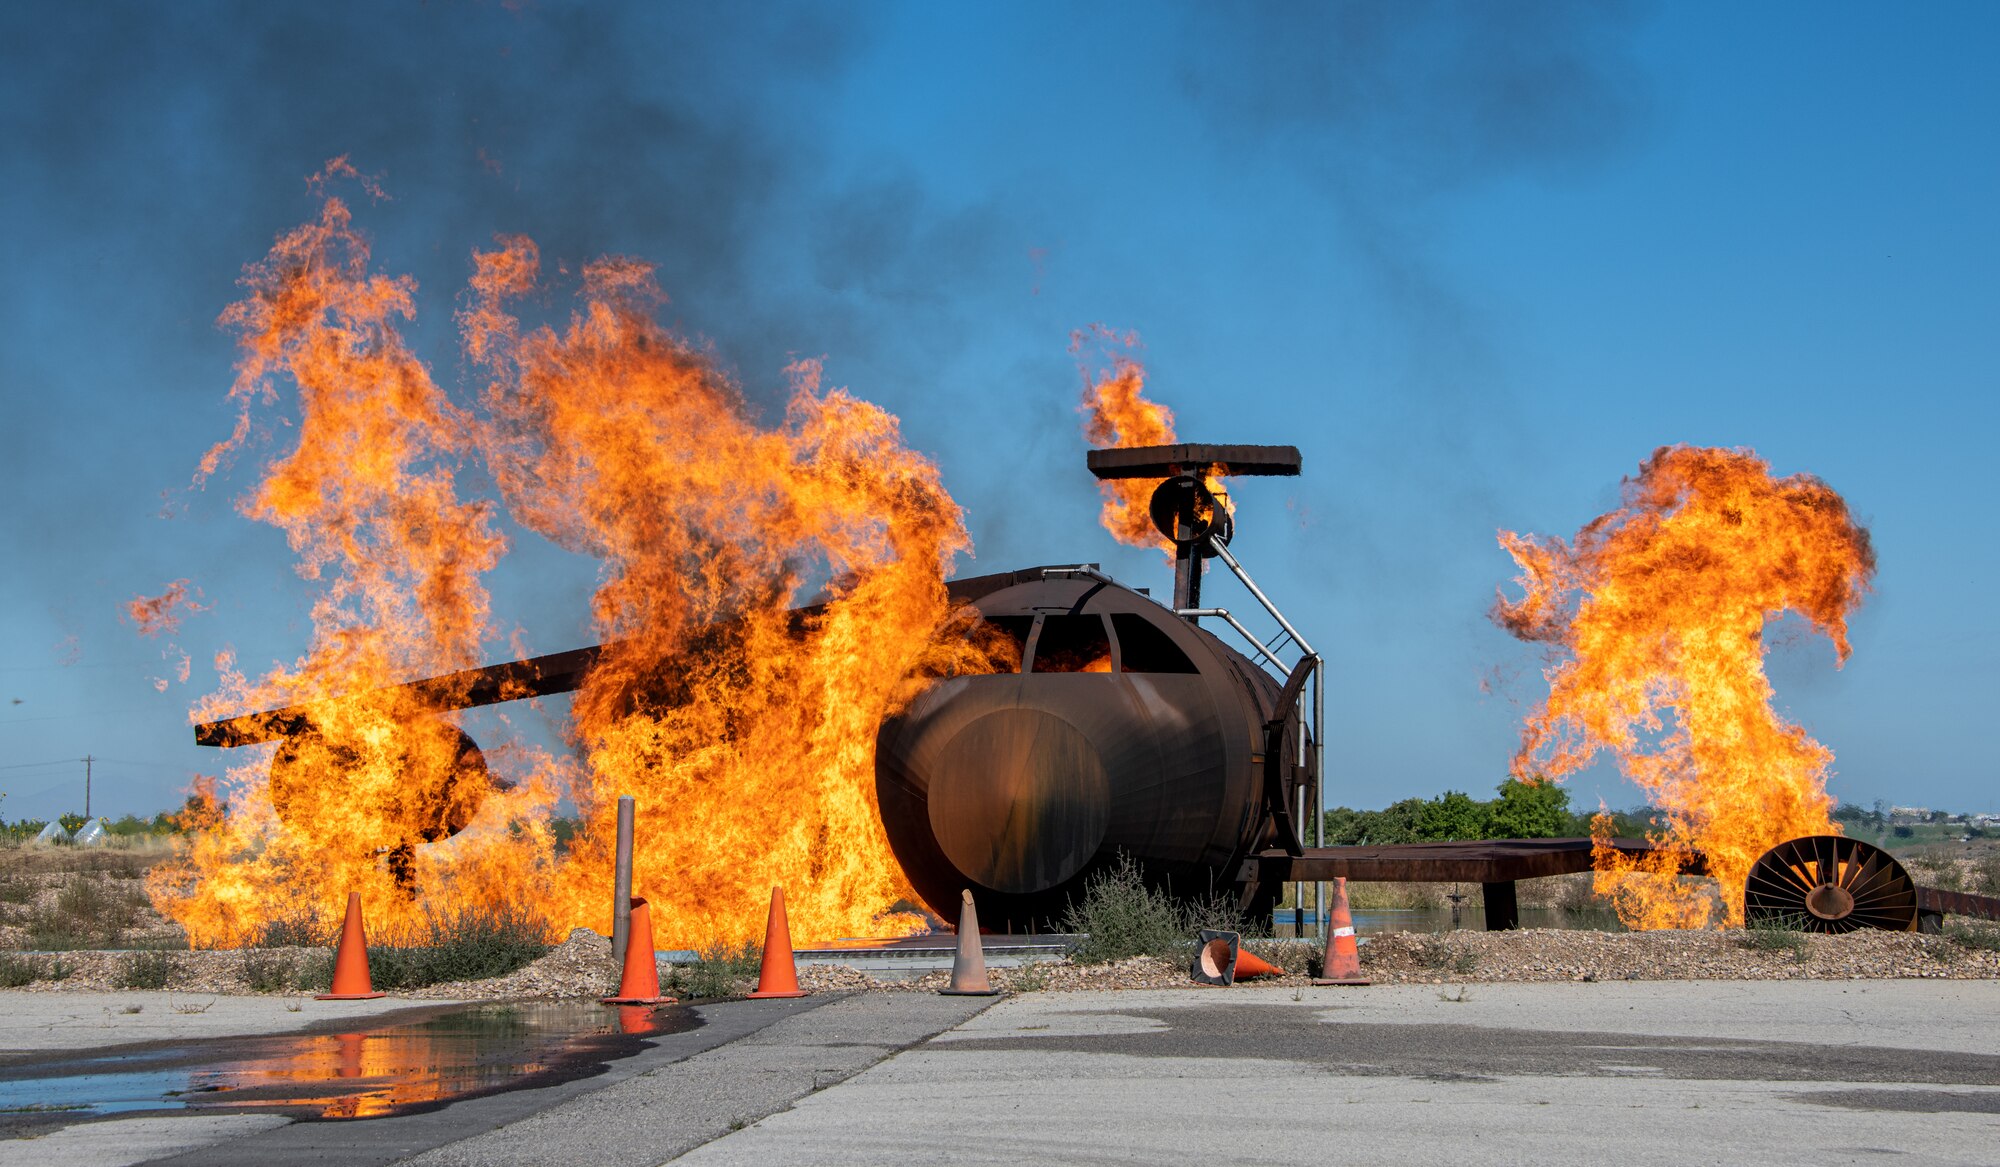 An aircraft is set on fire as part of an aircraft live-fire burn conducted by the 419th Civil Engineer Squadron at Hill Air Force Bas